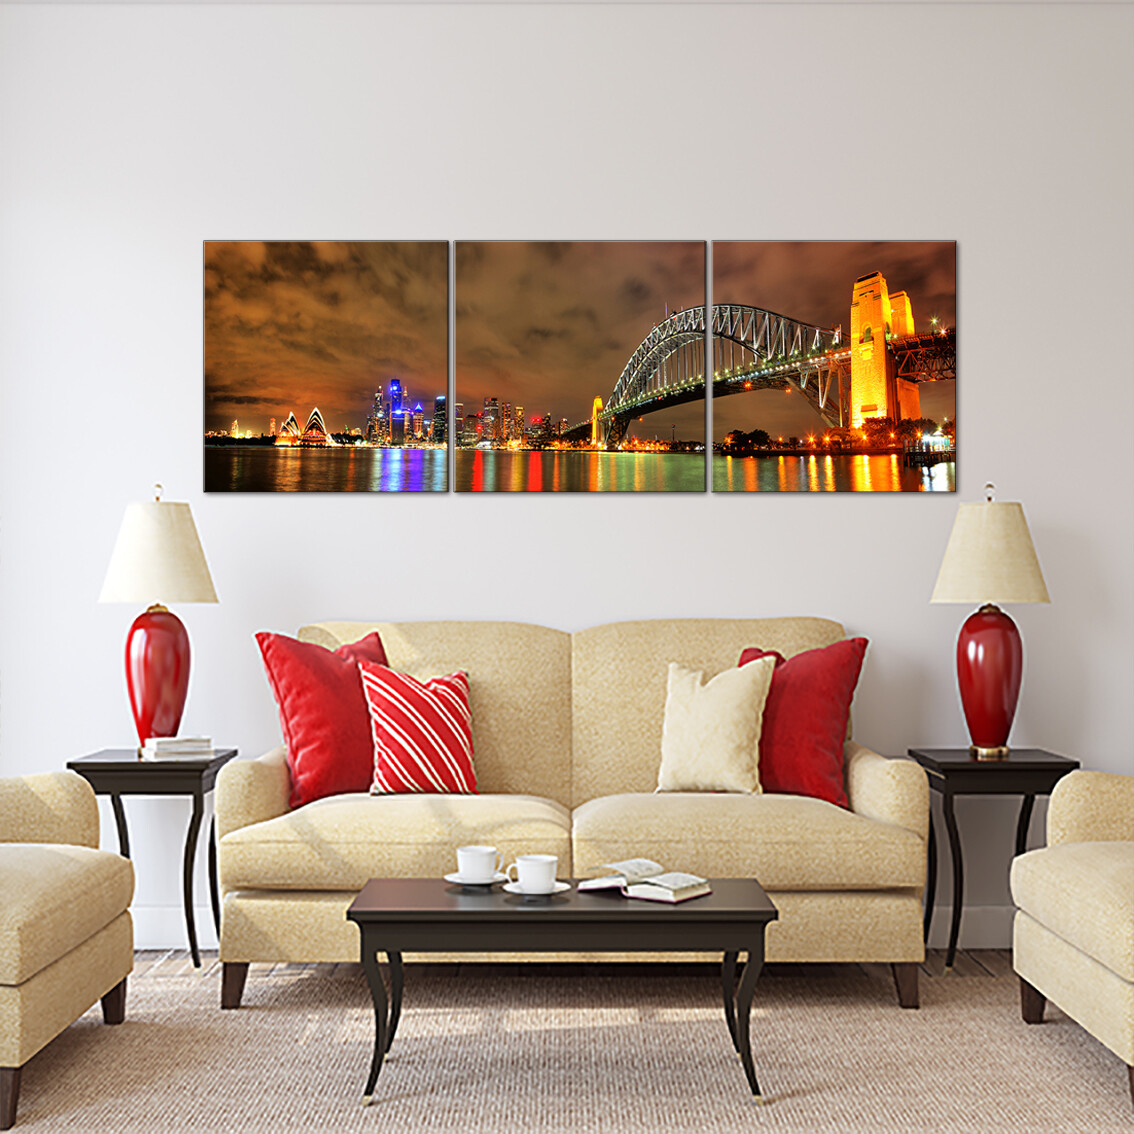 Sydney Harbour (3 panels) - Modern Luxury Wall art Printed on Acrylic Glass - Frameless and Ready to Hang 